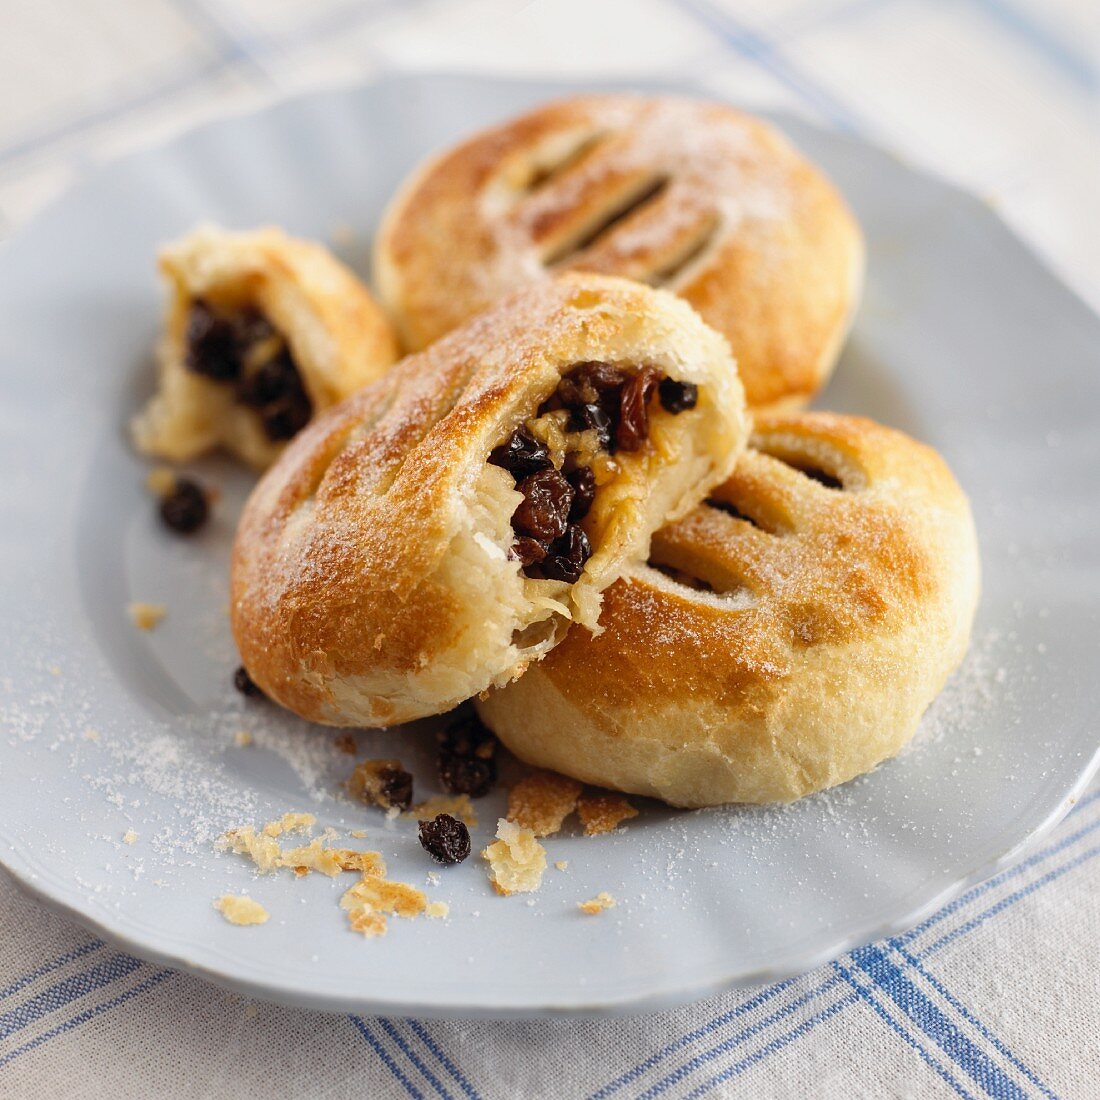 Eccles cakes (pastry filled with raisins, England)